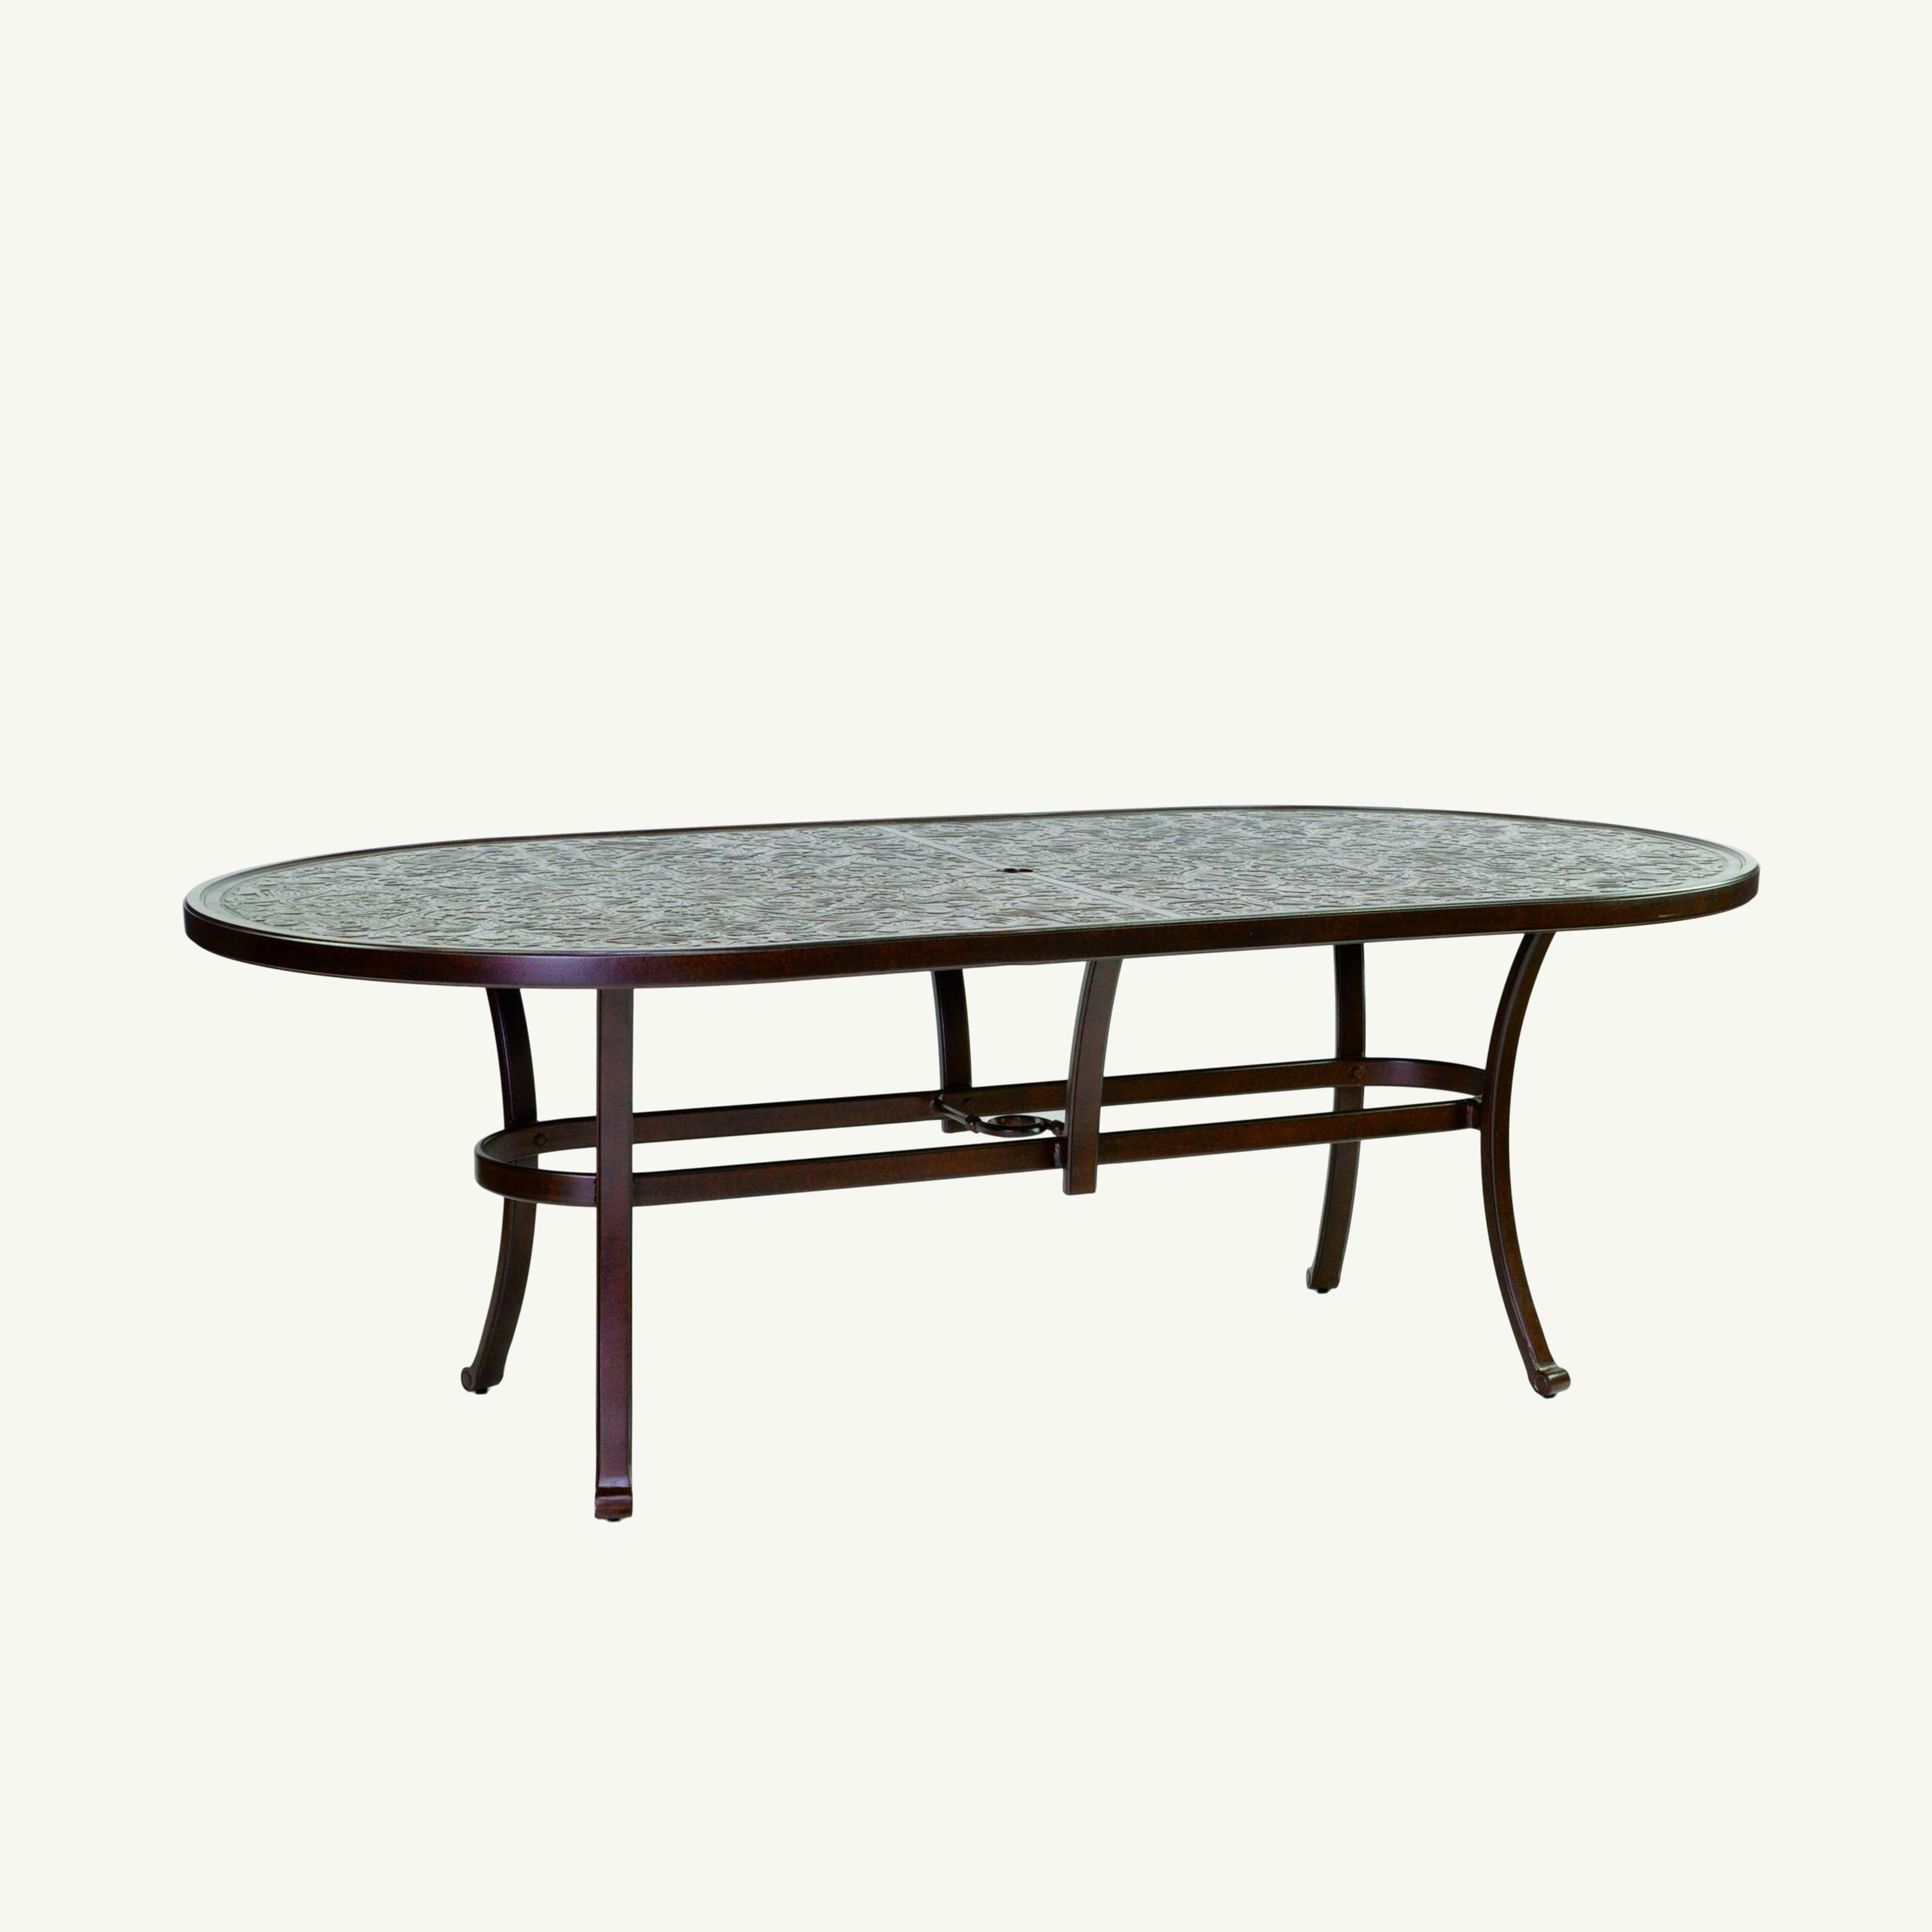 Vintage 84" Oval Dining Table